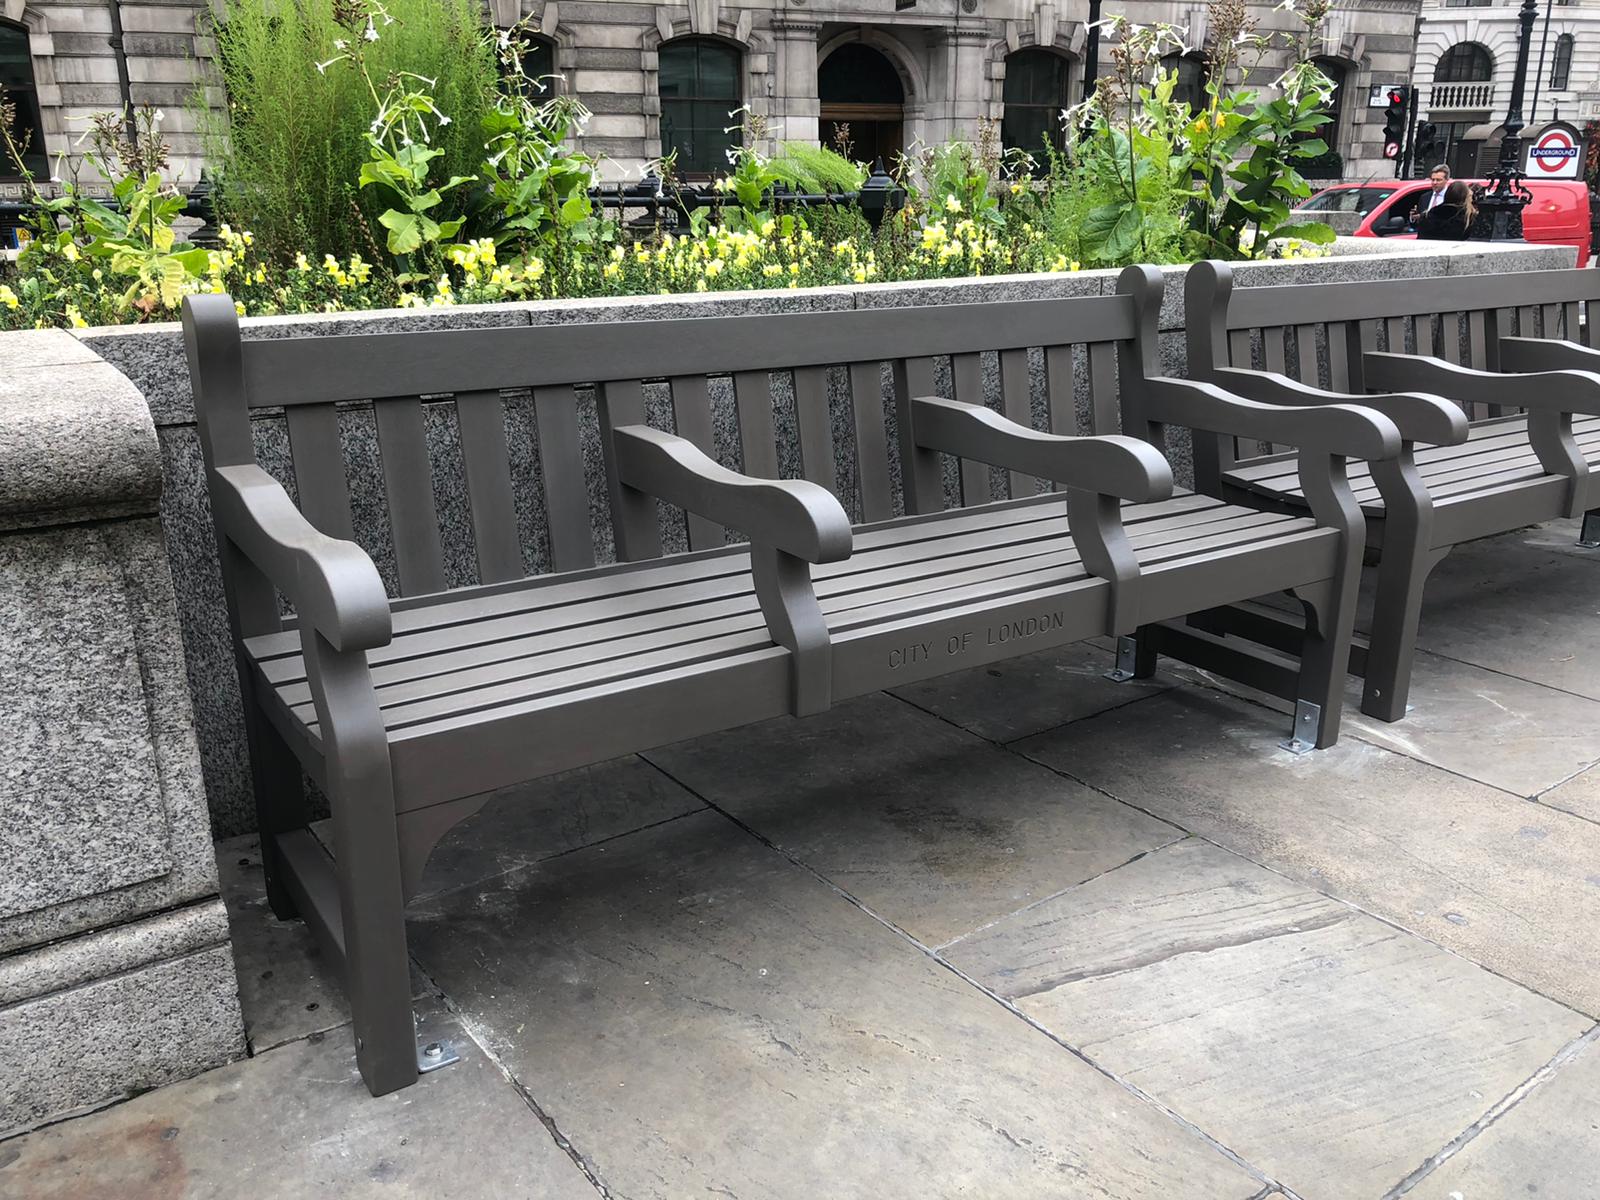 Westminster 1.95m seats installed outside London Bank, The Royal Exchange. Finished with Aquadecks in Graphite Grey